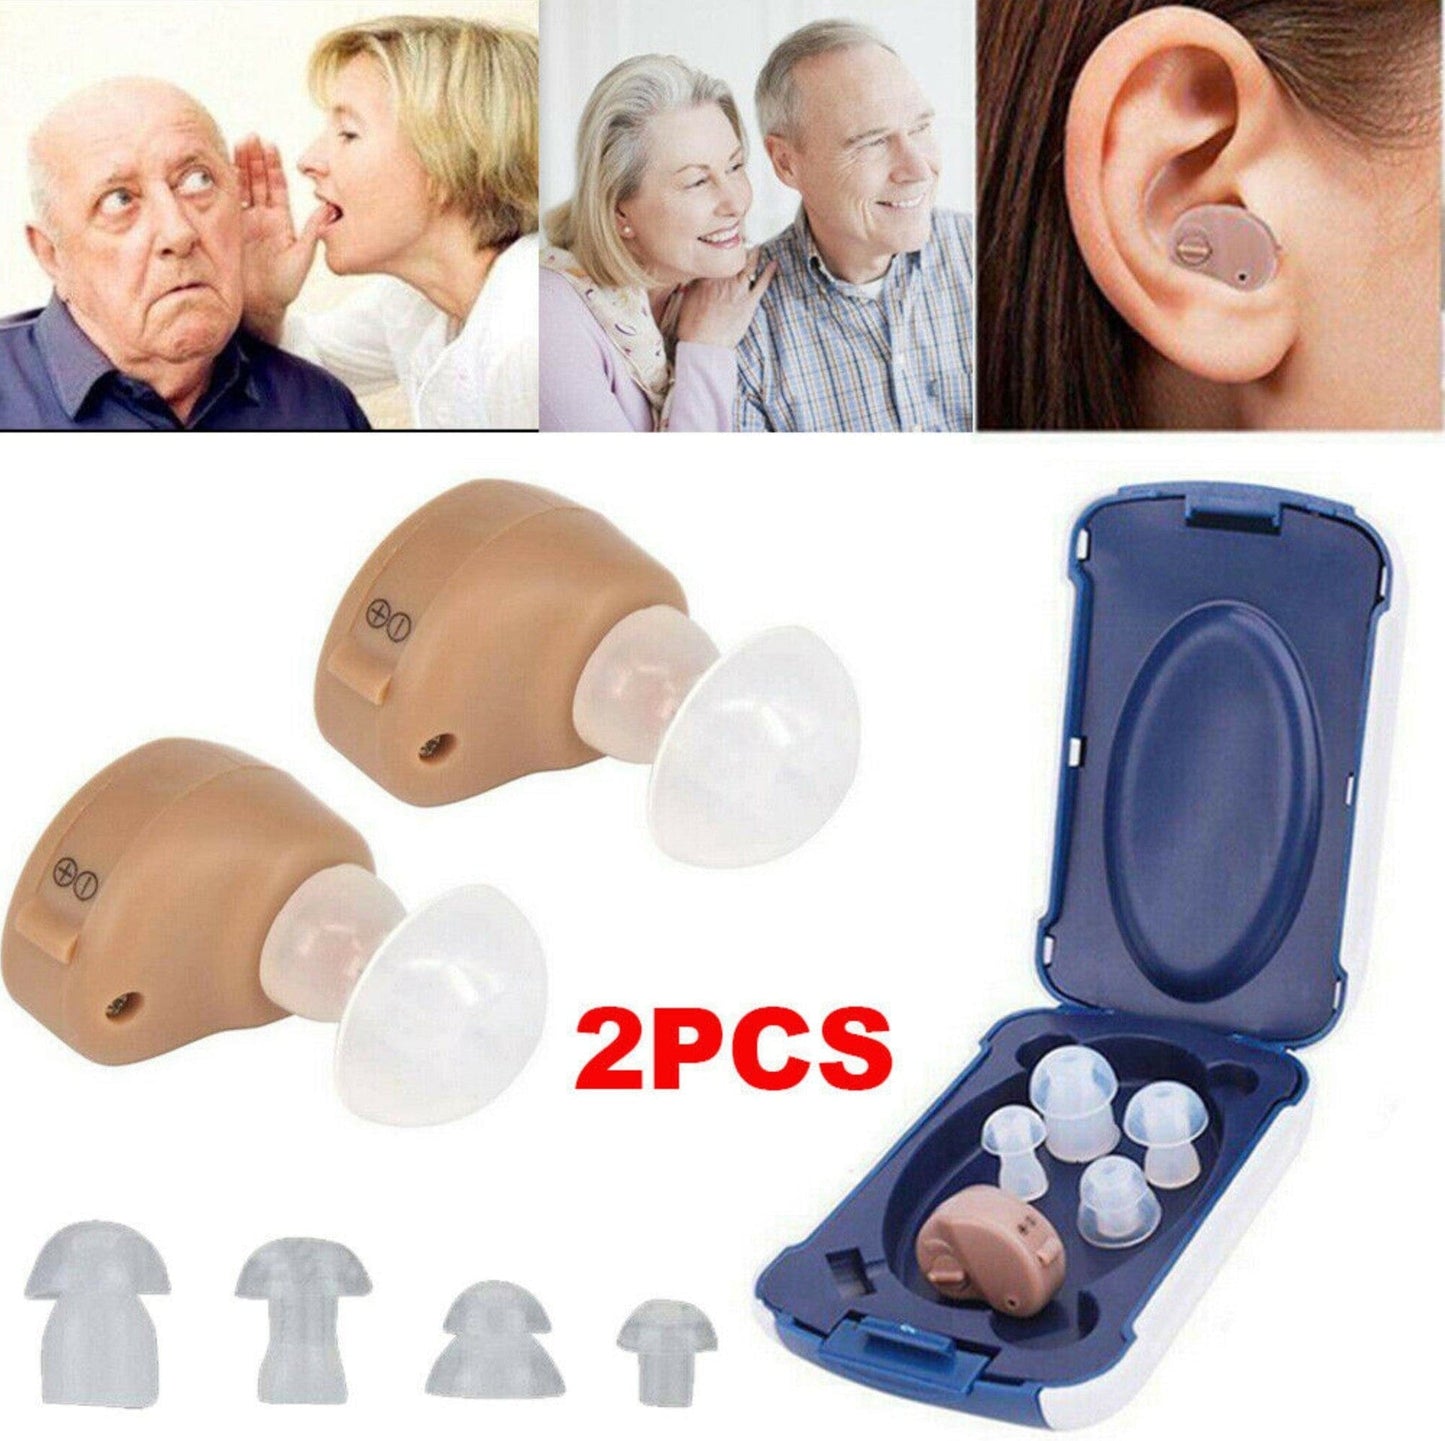 Two Sets Of Hearing Aid Sound Amplifier Hearing Aid Headphones - CLASSY CLOSET BOUTIQUETwo Sets Of Hearing Aid Sound Amplifier Hearing Aid HeadphoneseperloD85B6A04DEDC459A94FCBB12BE07E9A2